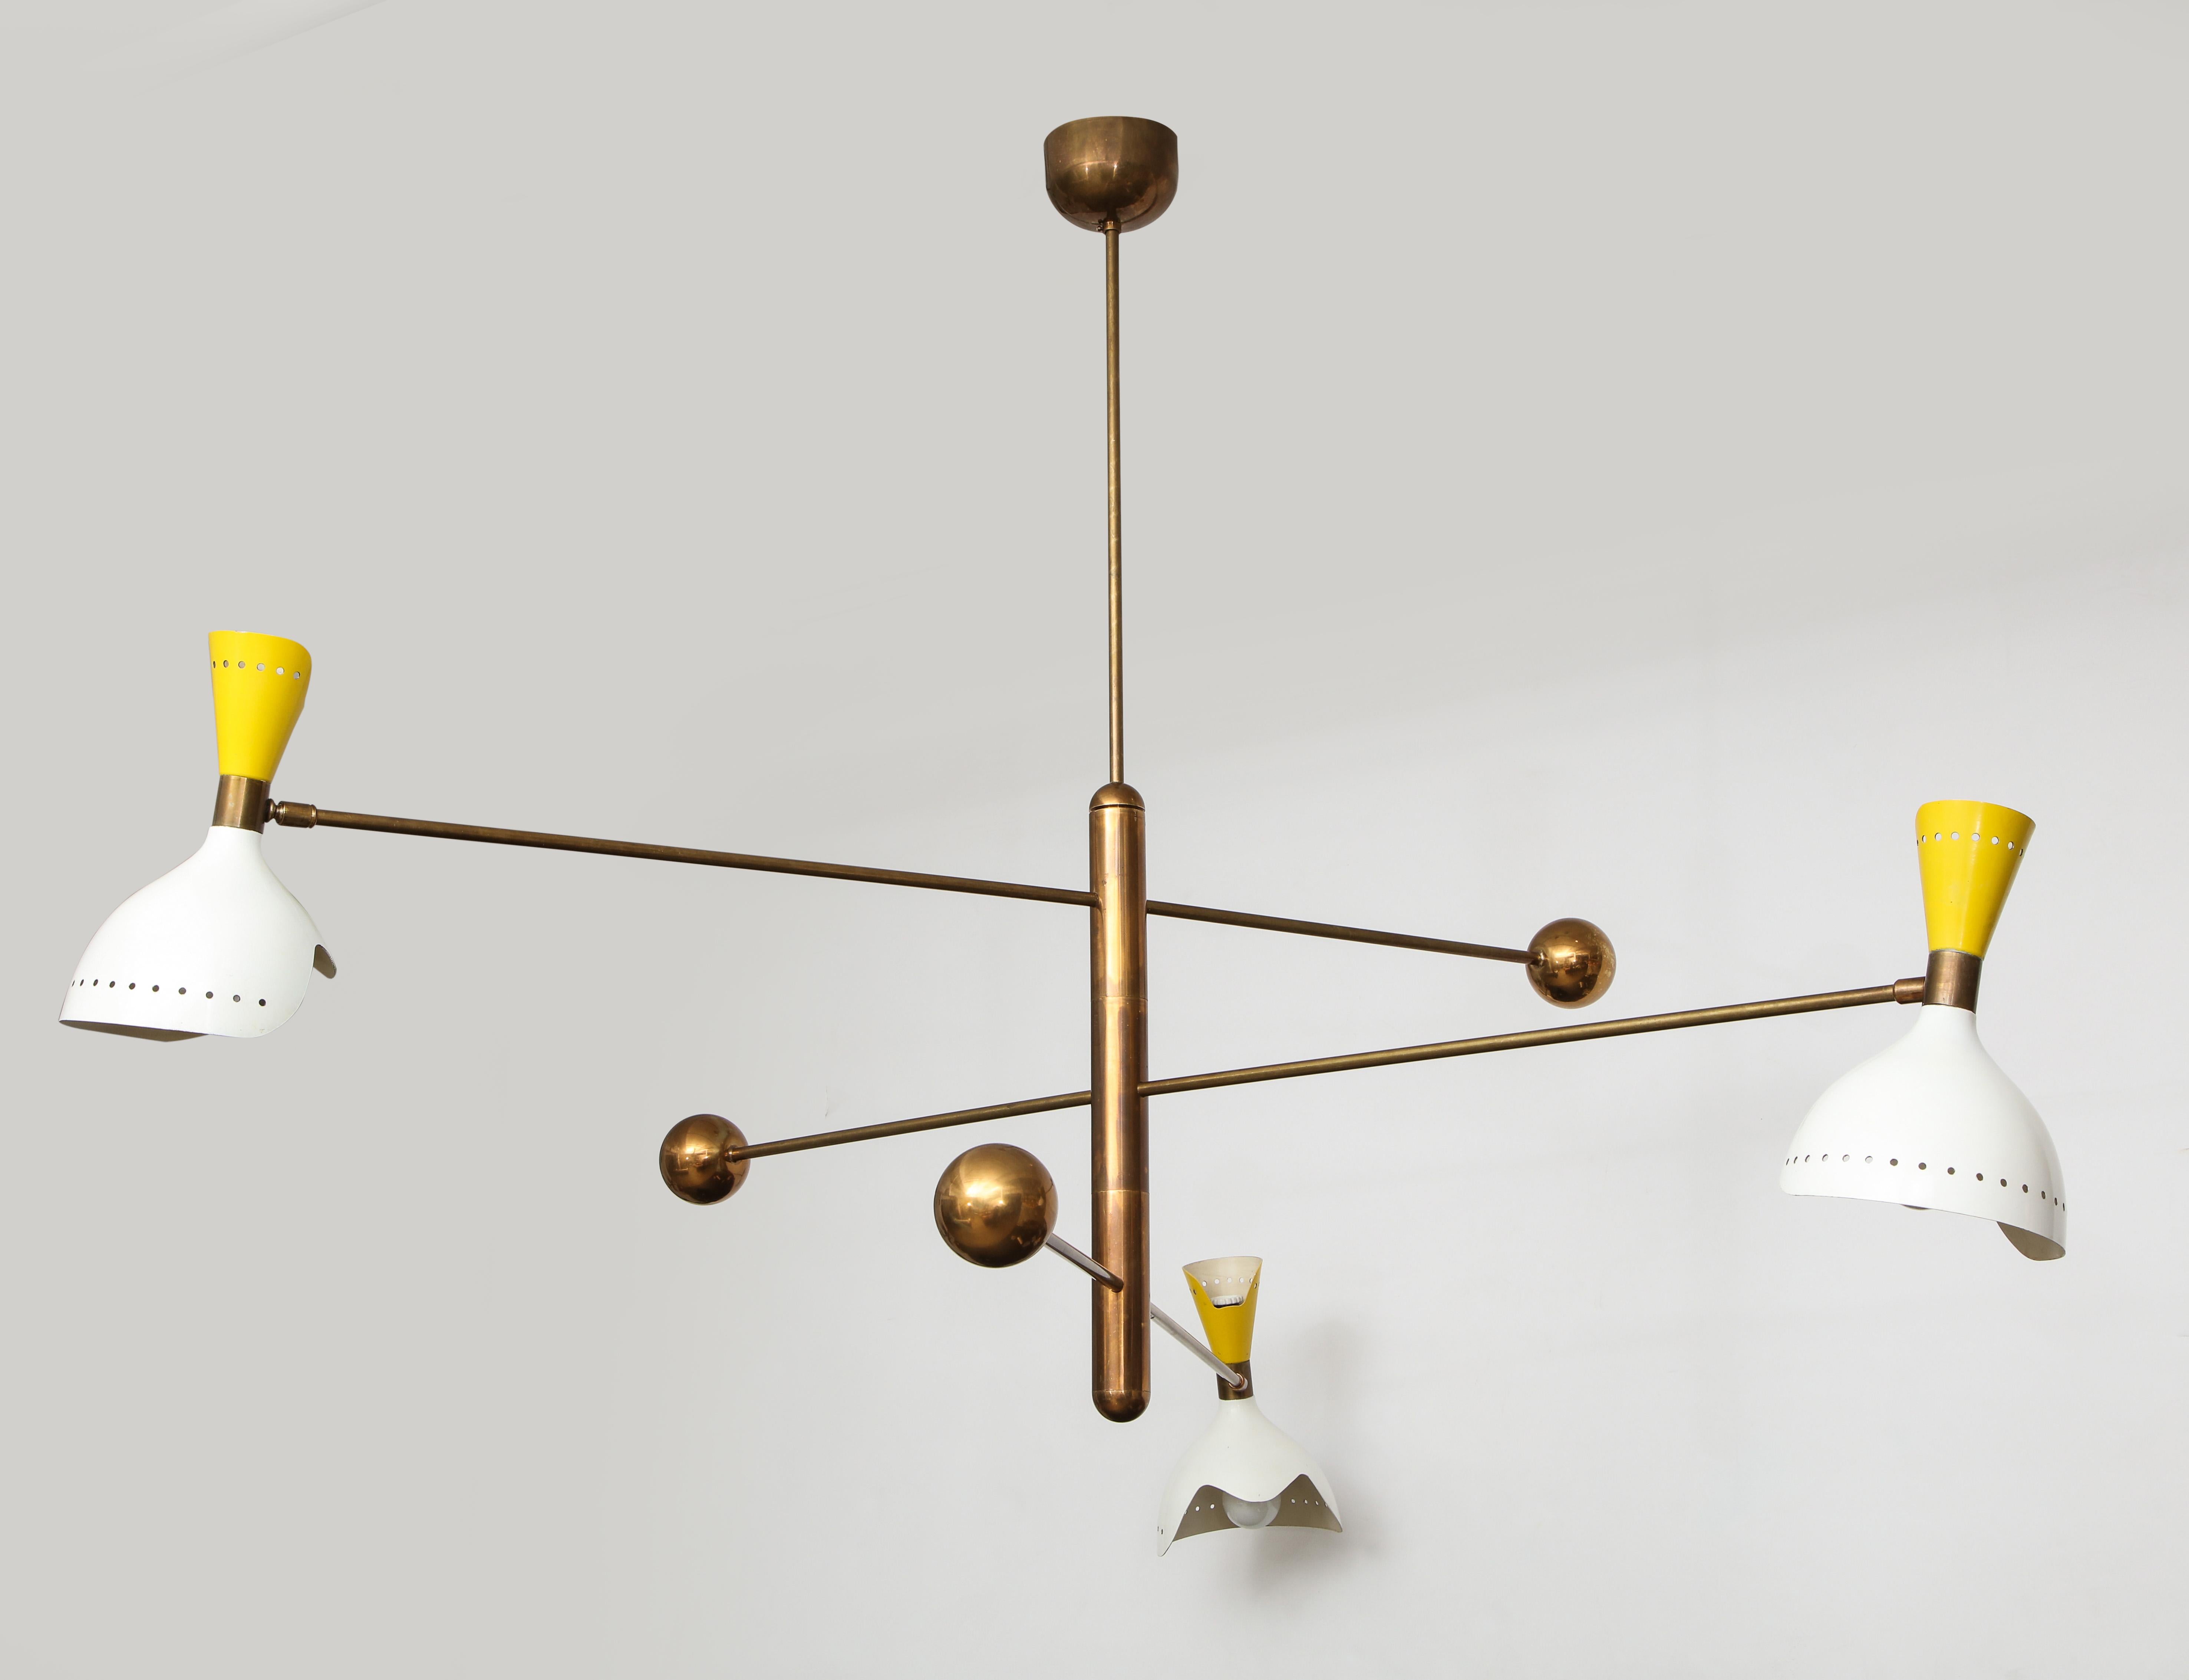 Stilnovo rare three-arm mobile chandelier suspended from brass structure and canopy, Italy, circa 1960. This hanging light fixture has rotating arms with curvaceous double cutout aluminum shades in lacquered white and yellow enamel and brass